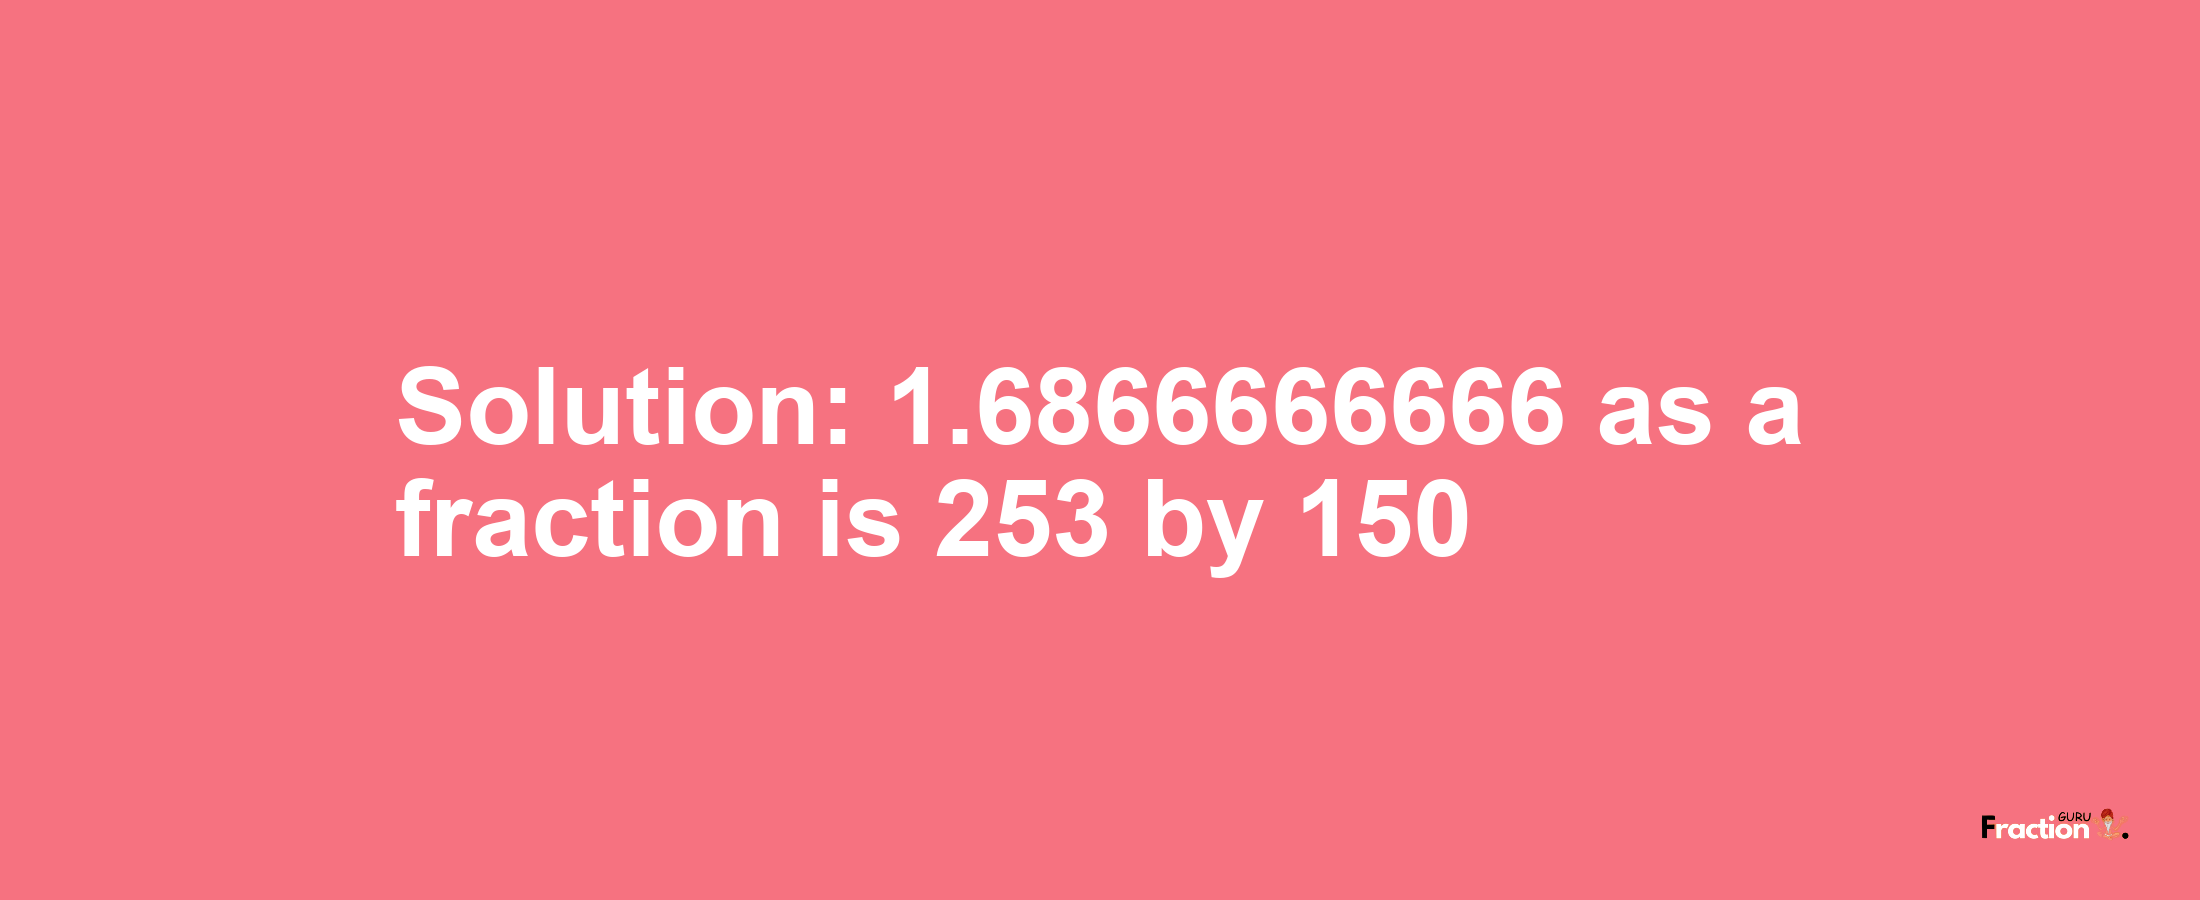 Solution:1.6866666666 as a fraction is 253/150